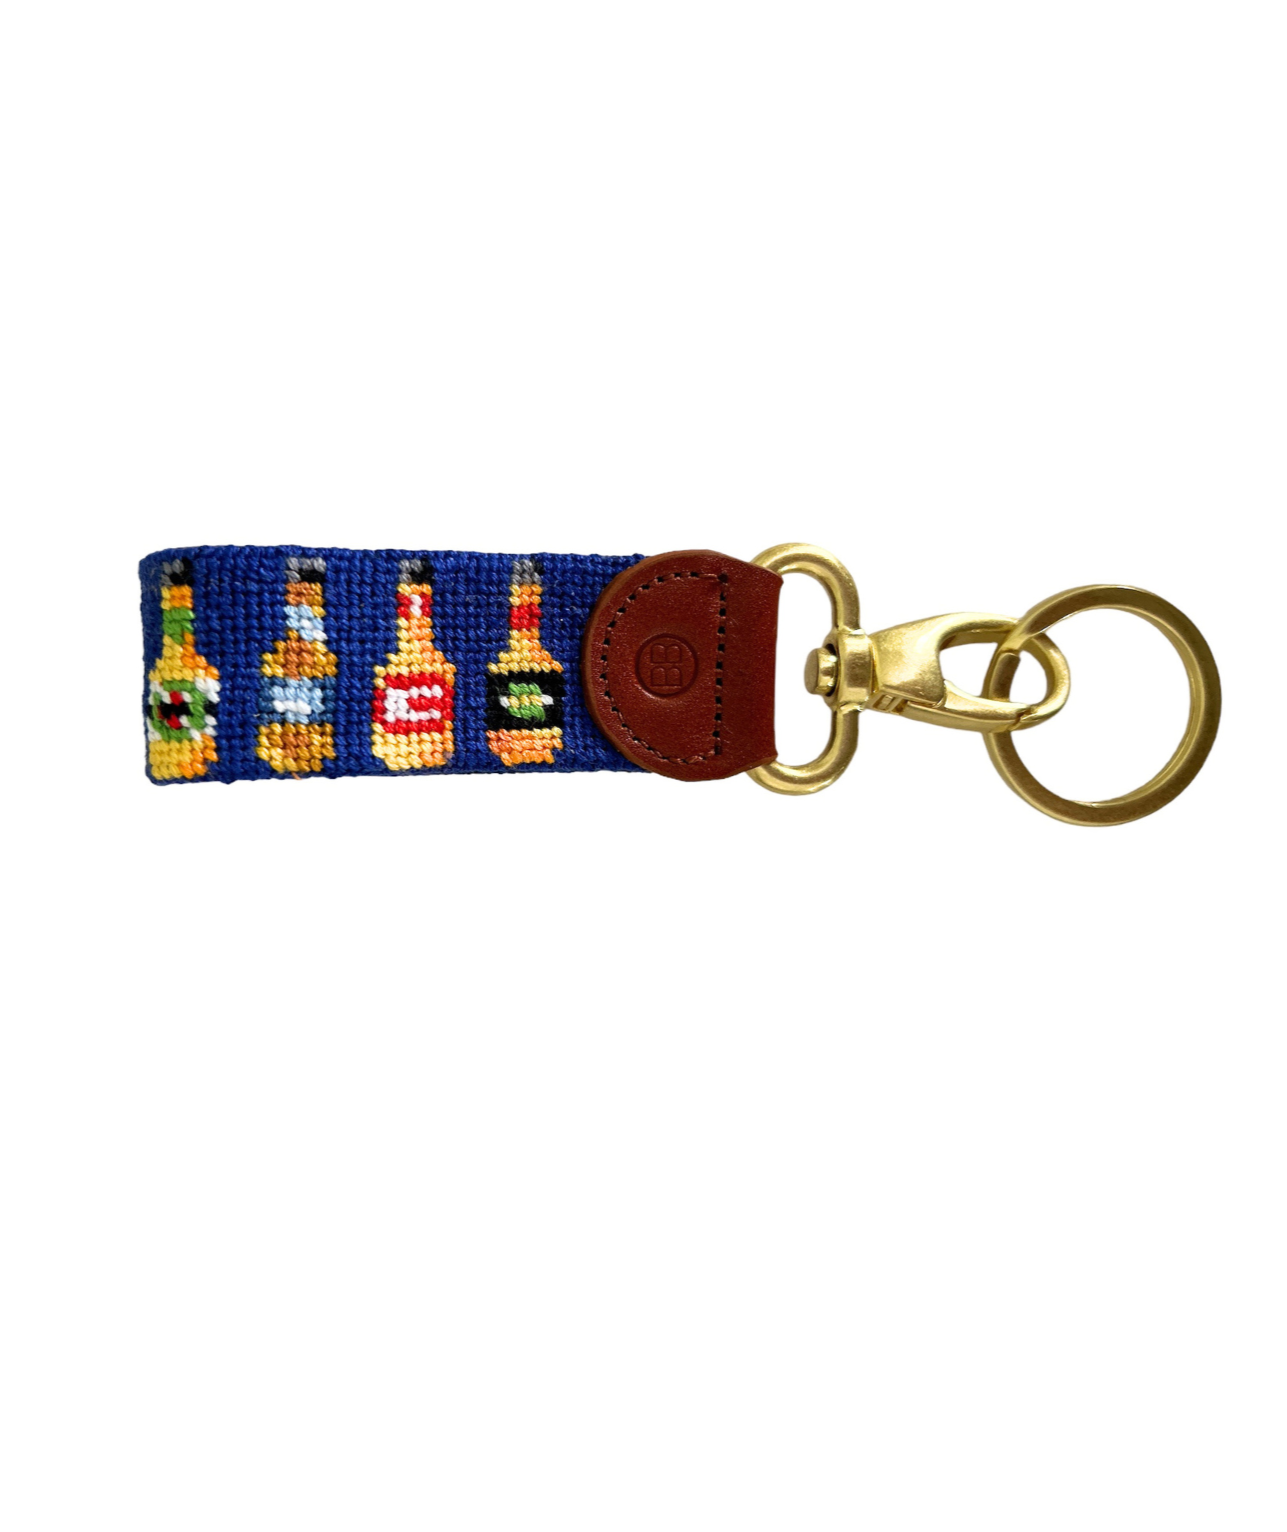 Key Fob , Needlepoint key chain Beer Bottle design with lobster clasp